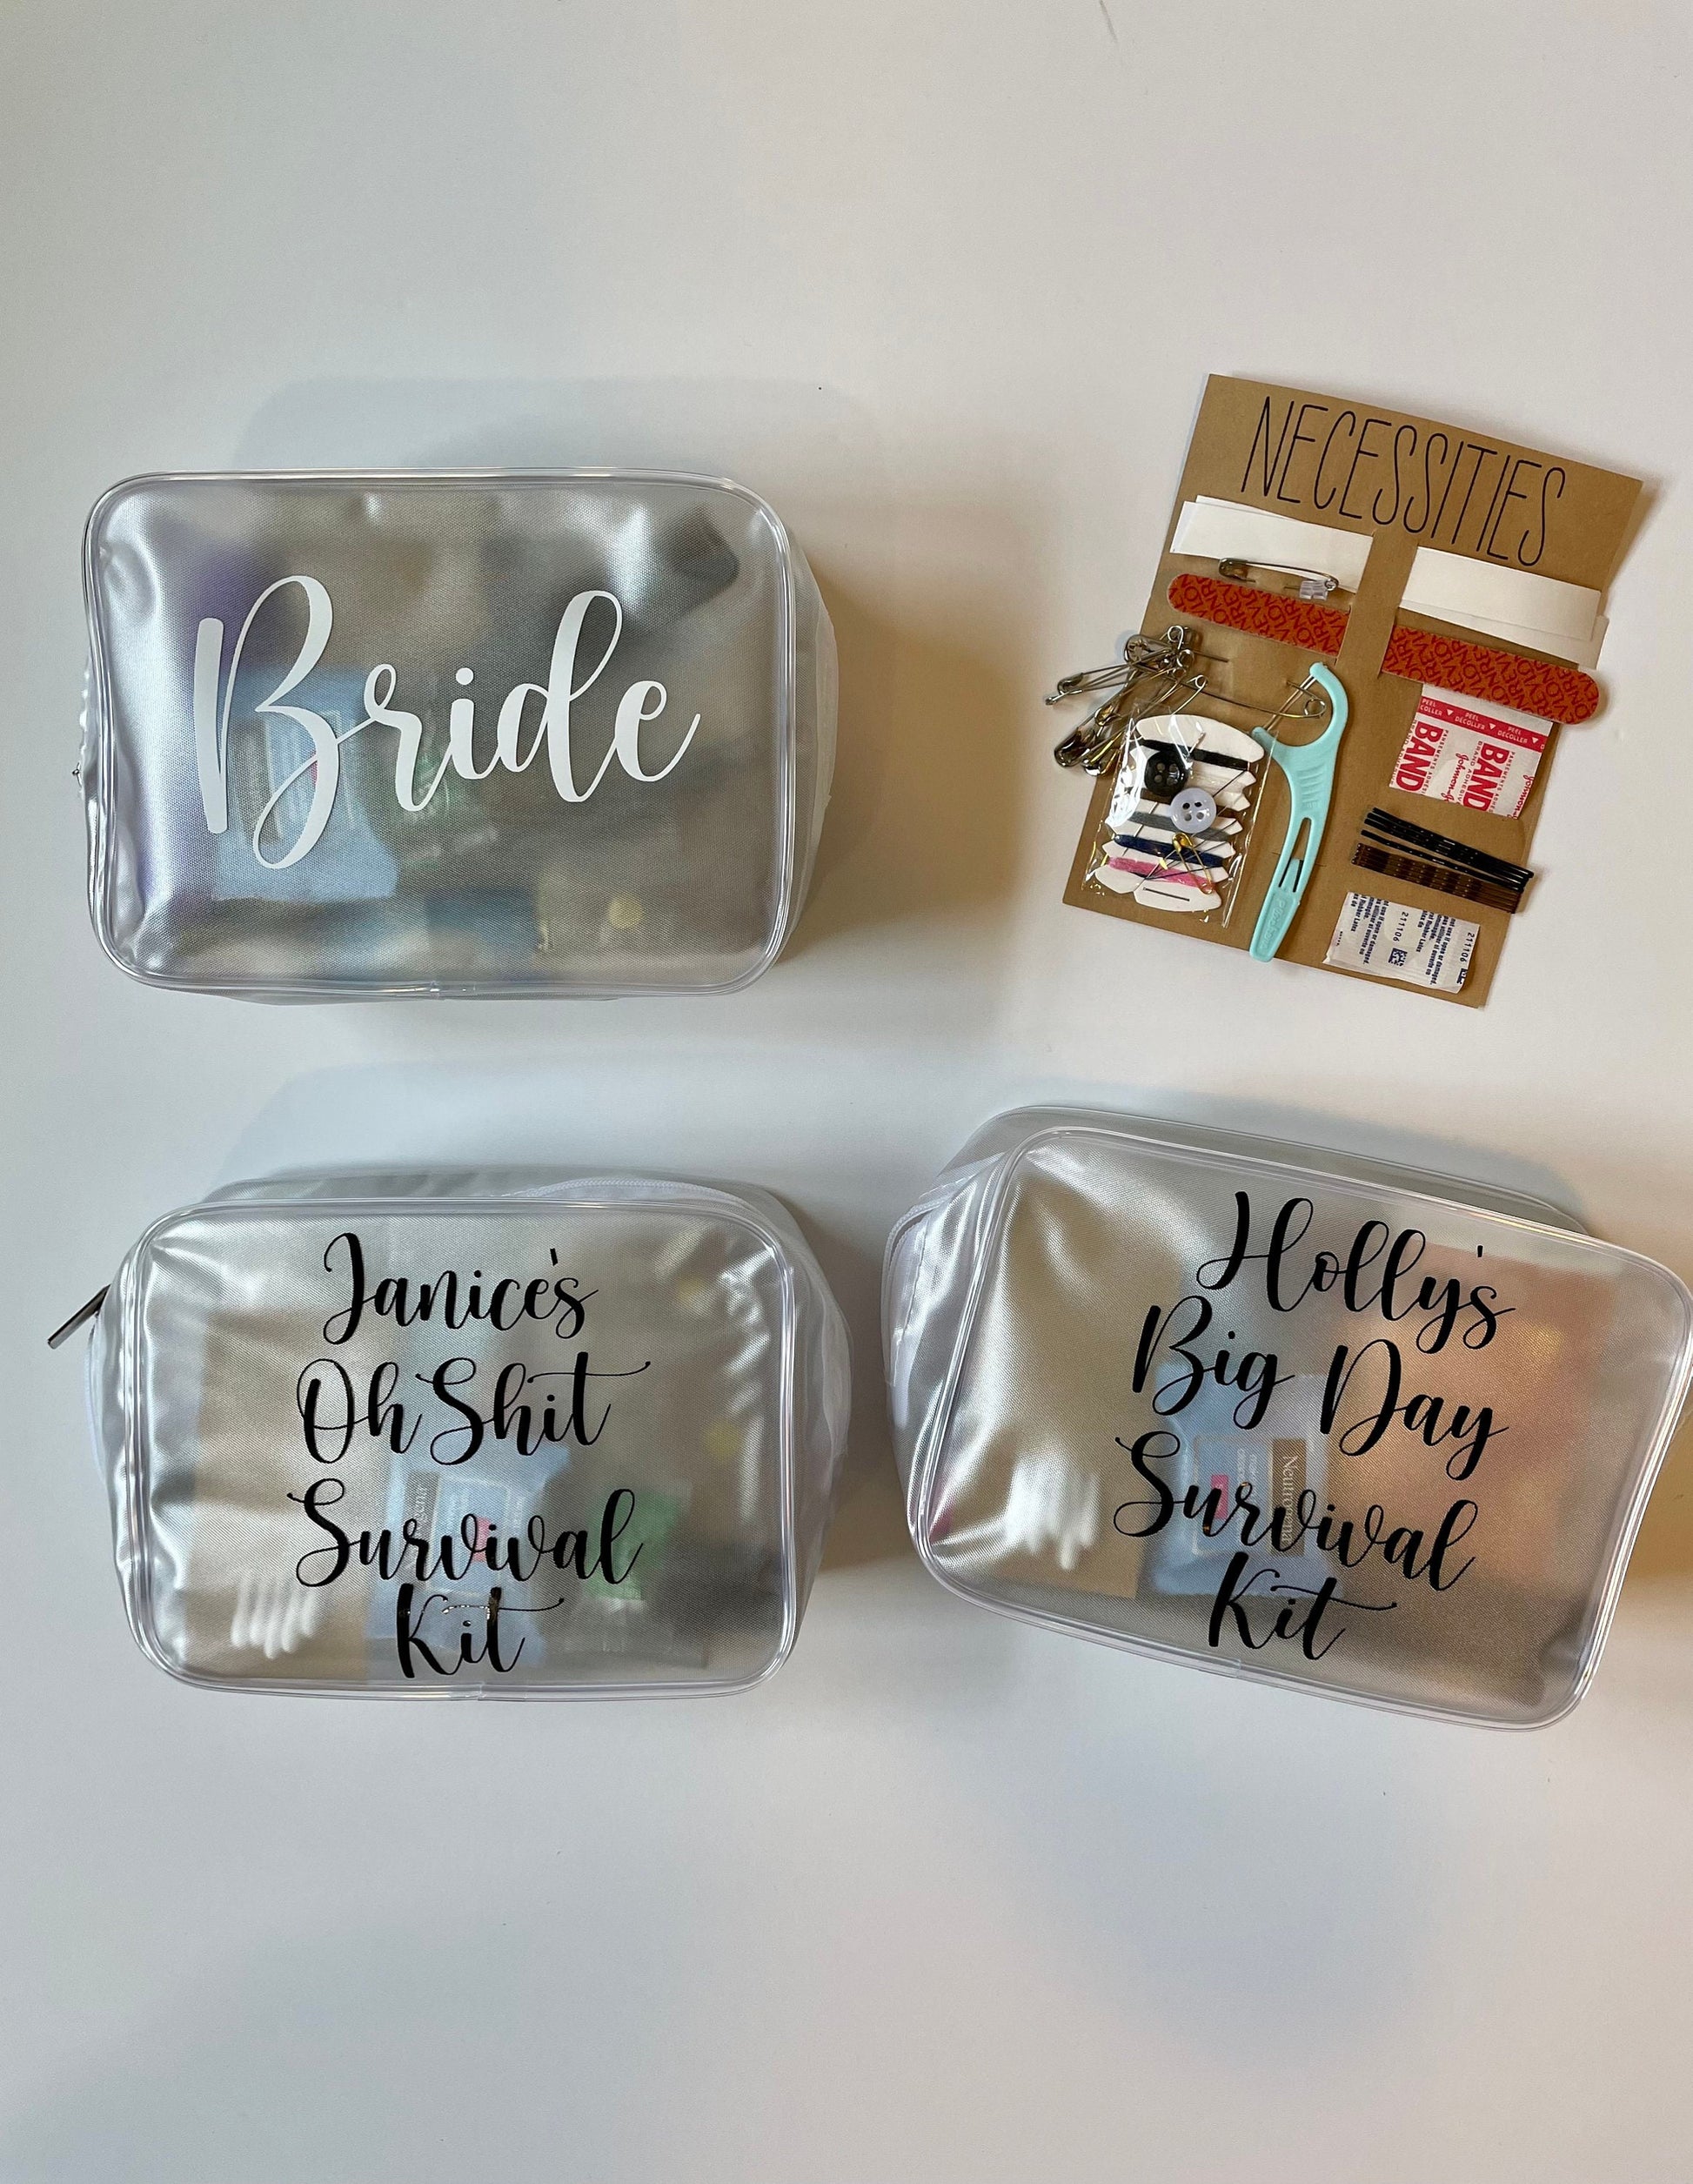 Wedding Day Emergency Kit Makeup bag Funny Bridal Shower Present Wedding  Survival Kit Cosmetic Bag Bridal Party Gifts for Bridesmaids Travel  Cosmetic Bag Pouch 